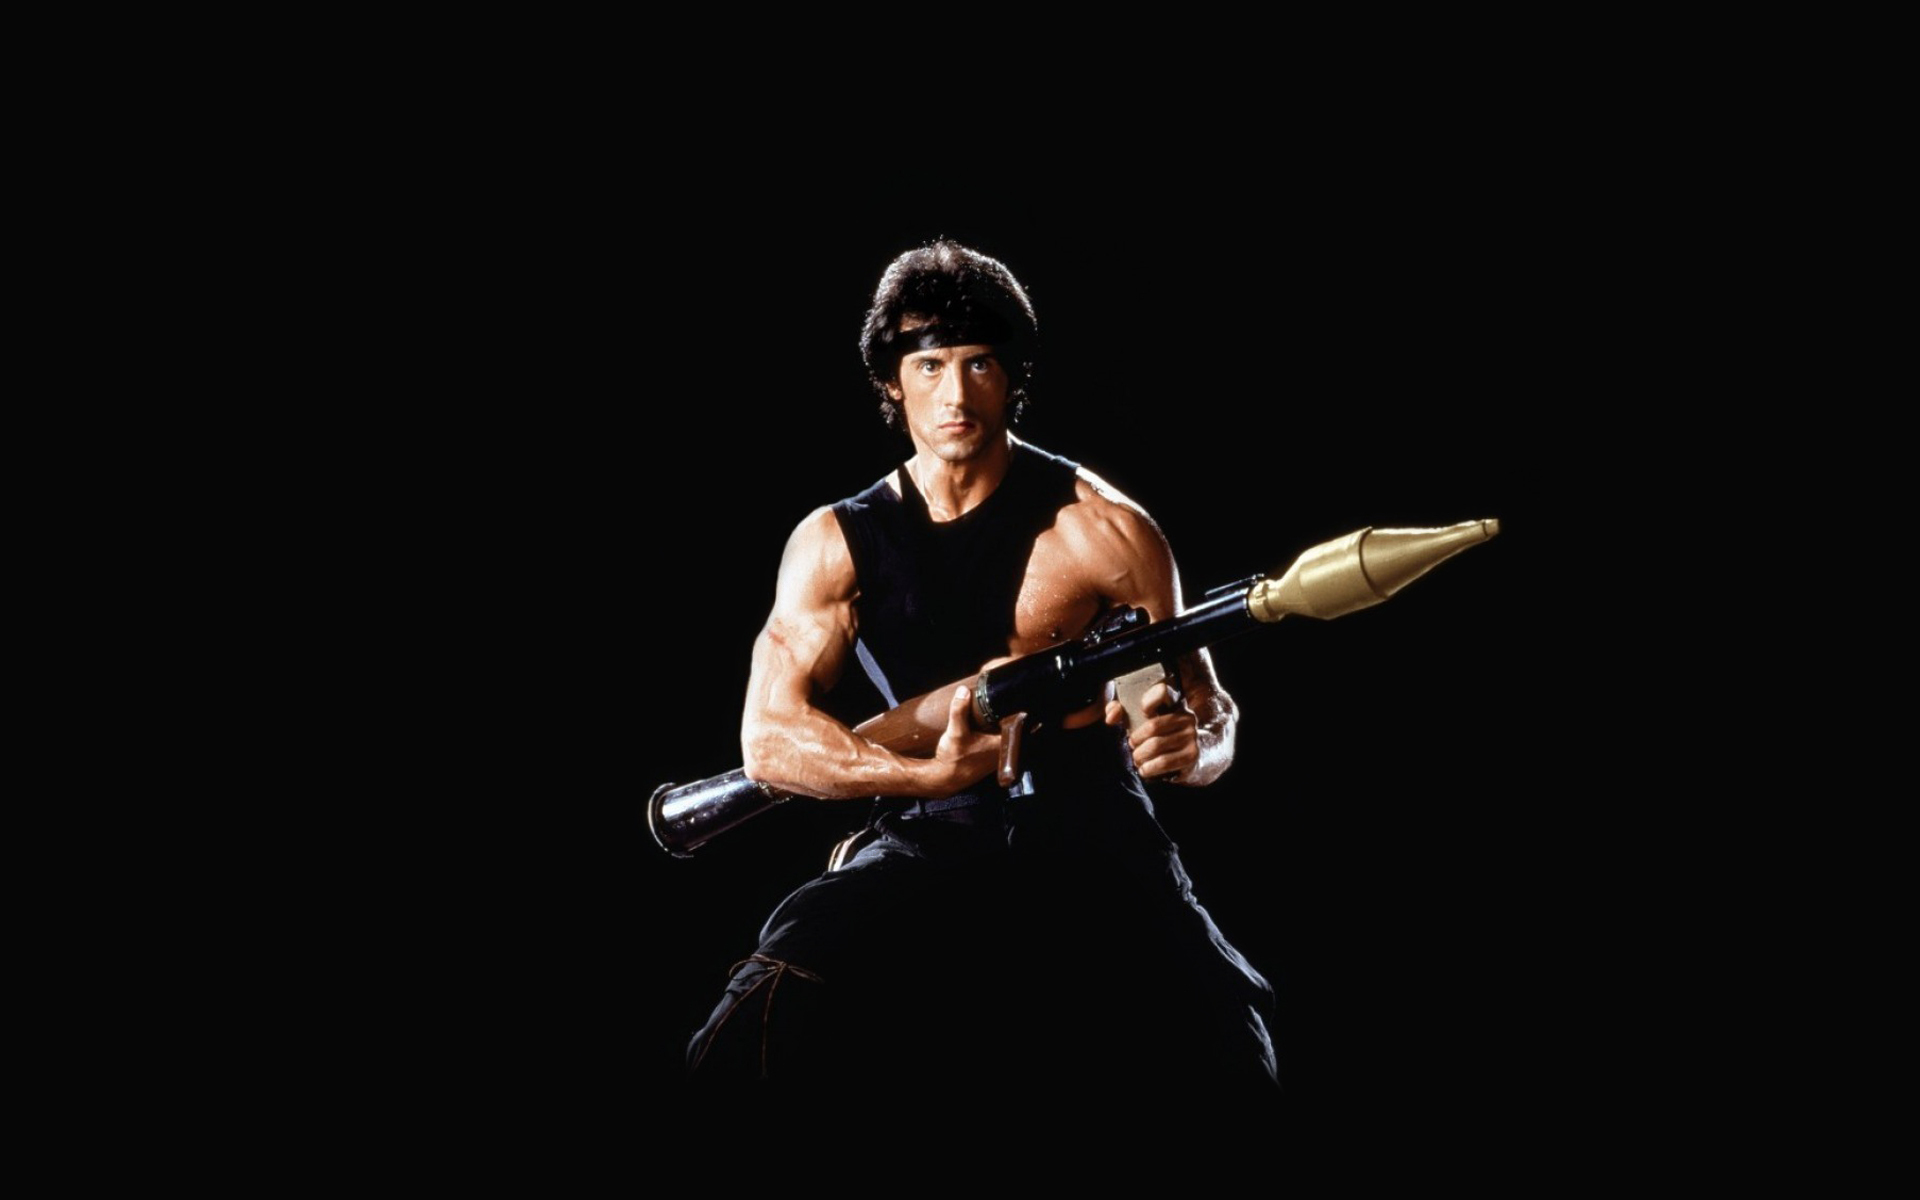 rambo, Grenade, Launcher, Sylvester, Stallone, Warrior, Soldier, Weapons, Actor, Muscle, Men, Males, Celebrities, Action Wallpaper